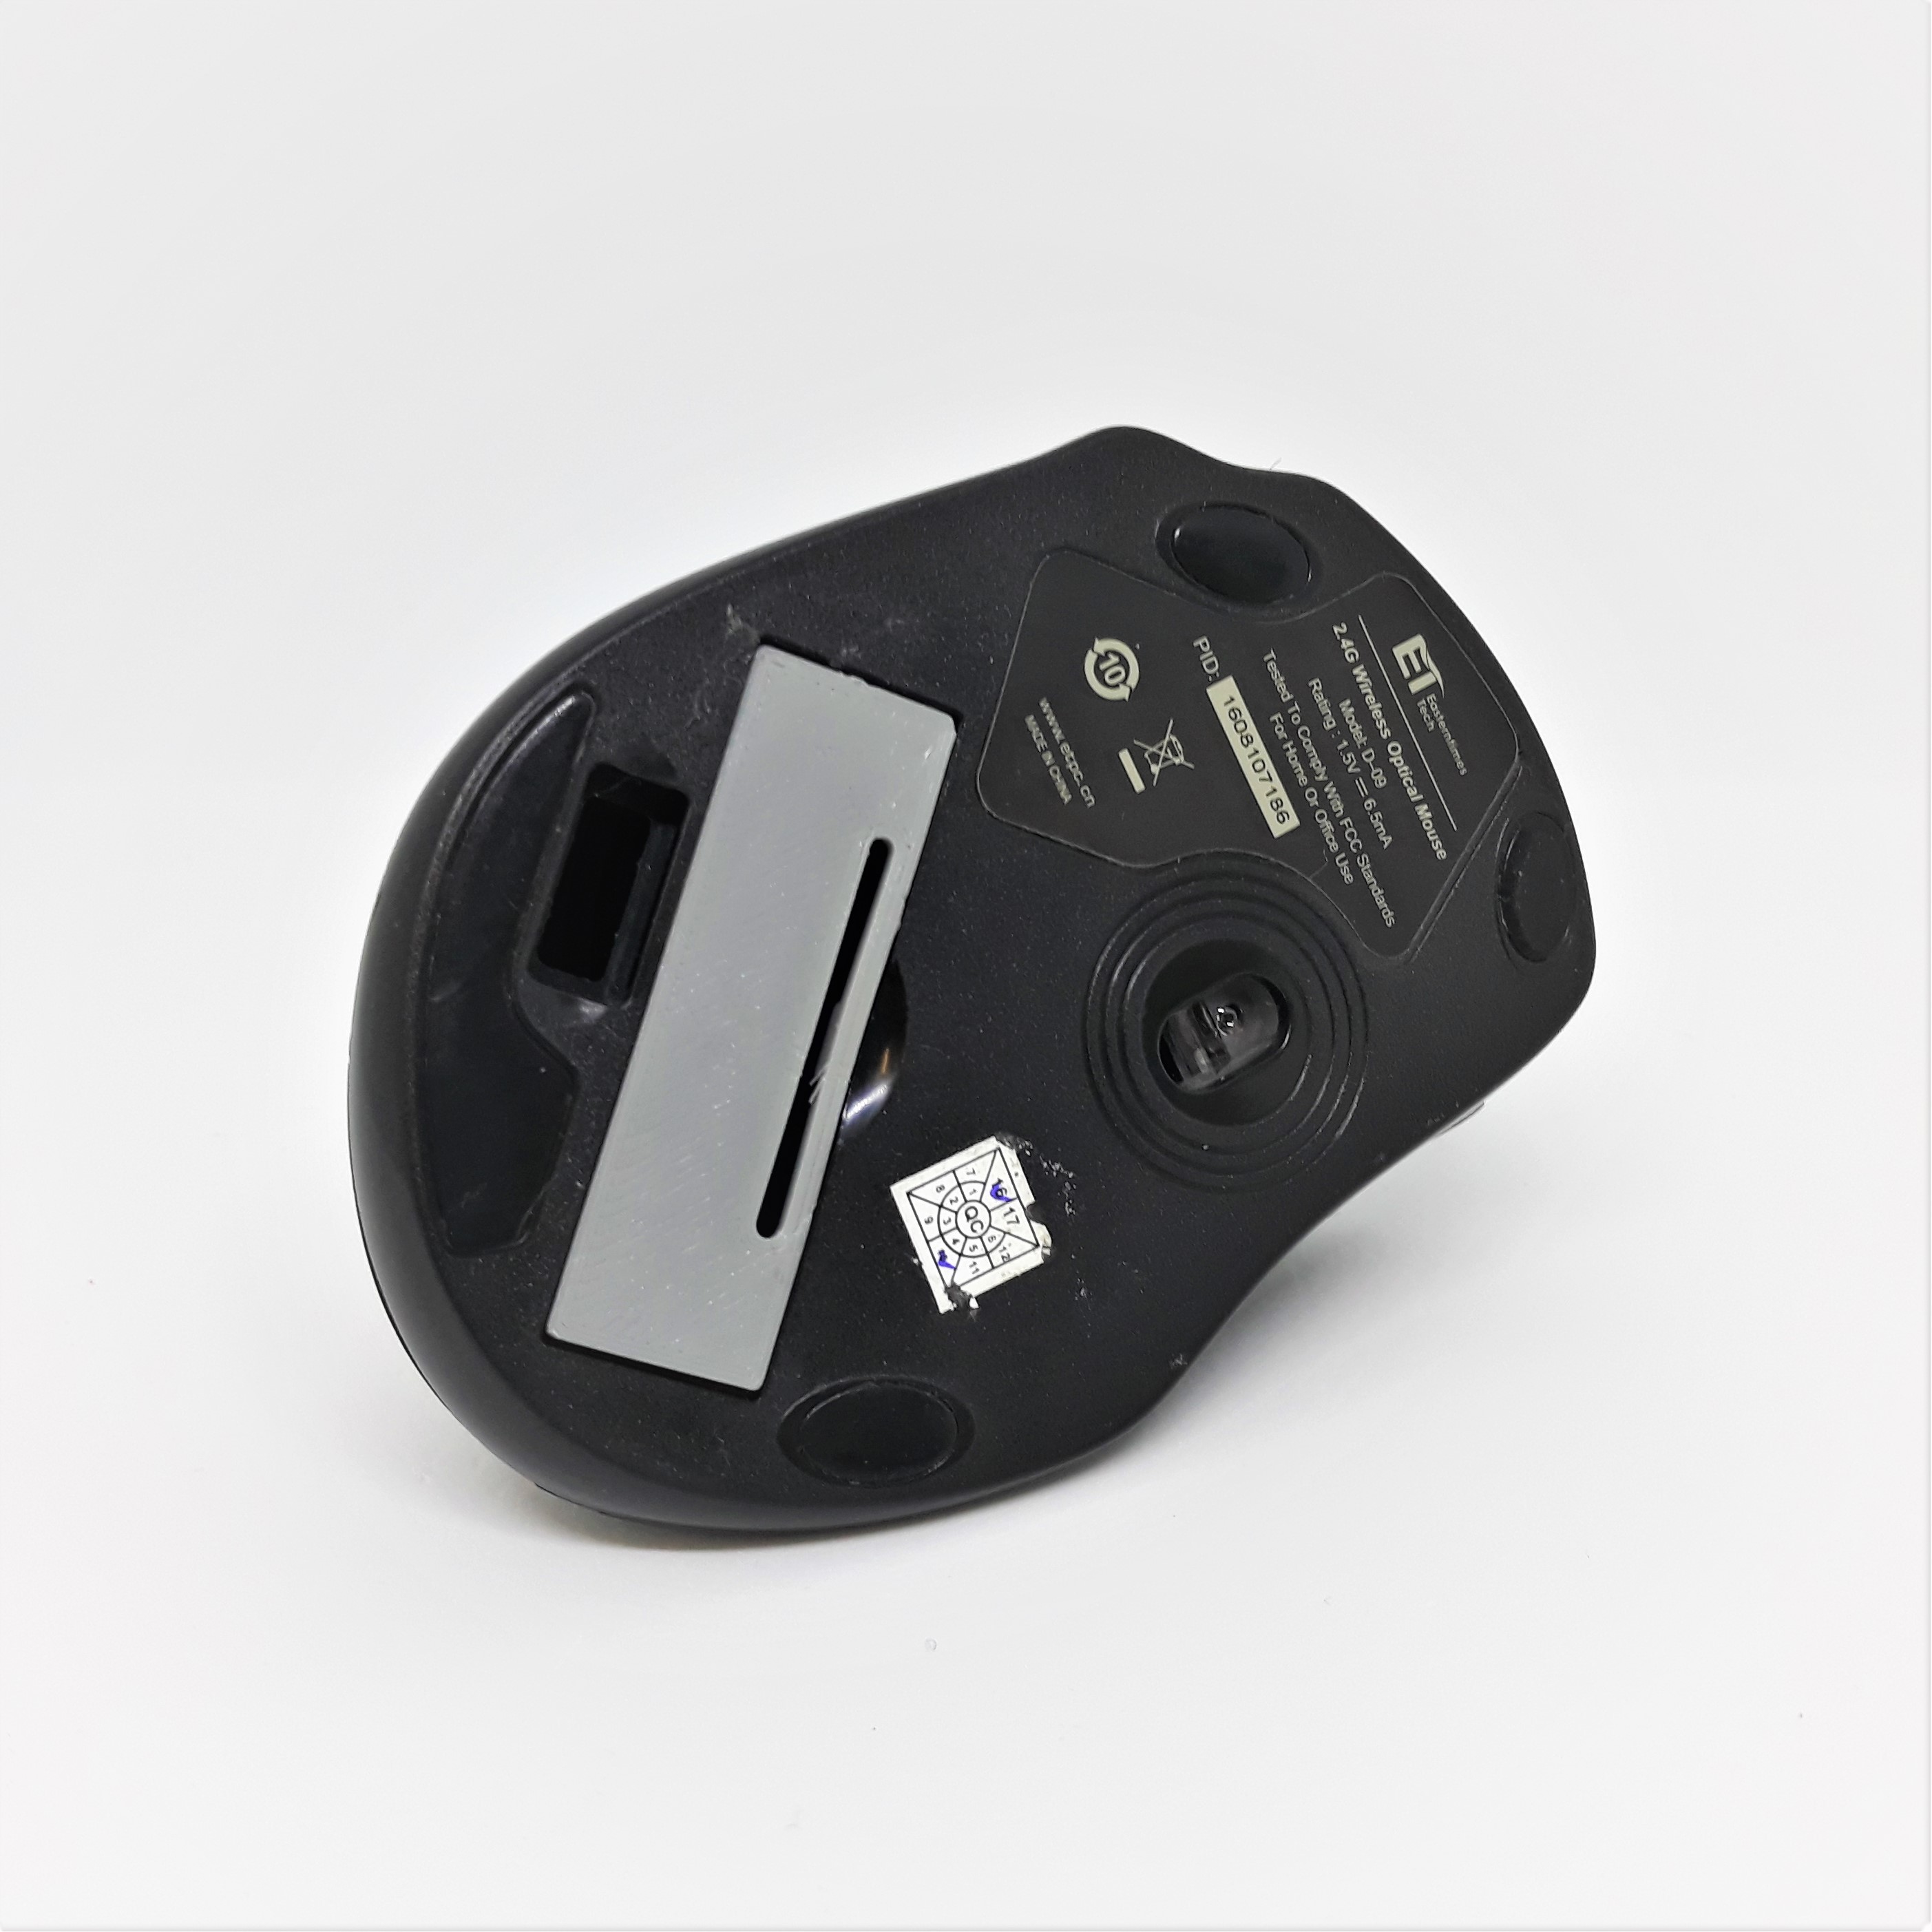 Battery cover for computer mouse